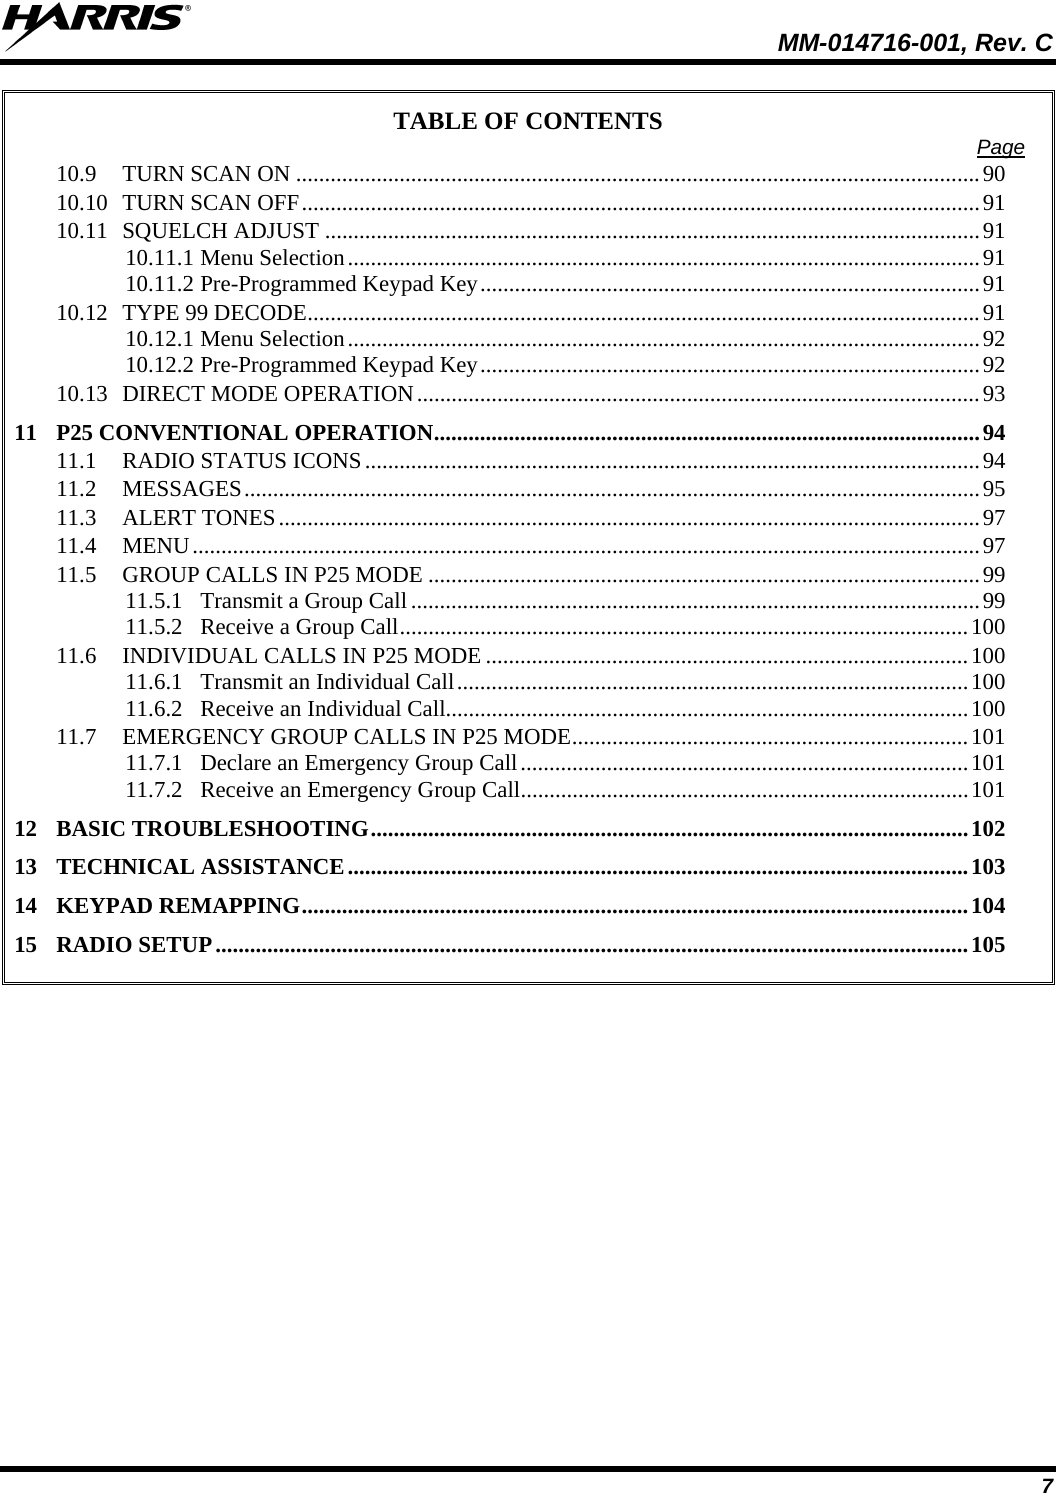  MM-014716-001, Rev. C 7 TABLE OF CONTENTS  Page 10.9 TURN SCAN ON .......................................................................................................................90 10.10 TURN SCAN OFF......................................................................................................................91 10.11 SQUELCH ADJUST ..................................................................................................................91 10.11.1 Menu Selection..............................................................................................................91 10.11.2 Pre-Programmed Keypad Key.......................................................................................91 10.12 TYPE 99 DECODE.....................................................................................................................91 10.12.1 Menu Selection..............................................................................................................92 10.12.2 Pre-Programmed Keypad Key.......................................................................................92 10.13 DIRECT MODE OPERATION..................................................................................................93 11 P25 CONVENTIONAL OPERATION...............................................................................................94 11.1 RADIO STATUS ICONS...........................................................................................................94 11.2 MESSAGES................................................................................................................................95 11.3 ALERT TONES..........................................................................................................................97 11.4 MENU.........................................................................................................................................97 11.5 GROUP CALLS IN P25 MODE ................................................................................................99 11.5.1 Transmit a Group Call...................................................................................................99 11.5.2 Receive a Group Call...................................................................................................100 11.6 INDIVIDUAL CALLS IN P25 MODE ....................................................................................100 11.6.1 Transmit an Individual Call.........................................................................................100 11.6.2 Receive an Individual Call...........................................................................................100 11.7 EMERGENCY GROUP CALLS IN P25 MODE.....................................................................101 11.7.1 Declare an Emergency Group Call..............................................................................101 11.7.2 Receive an Emergency Group Call..............................................................................101 12 BASIC TROUBLESHOOTING........................................................................................................102 13 TECHNICAL ASSISTANCE............................................................................................................103 14 KEYPAD REMAPPING....................................................................................................................104 15 RADIO SETUP...................................................................................................................................105  